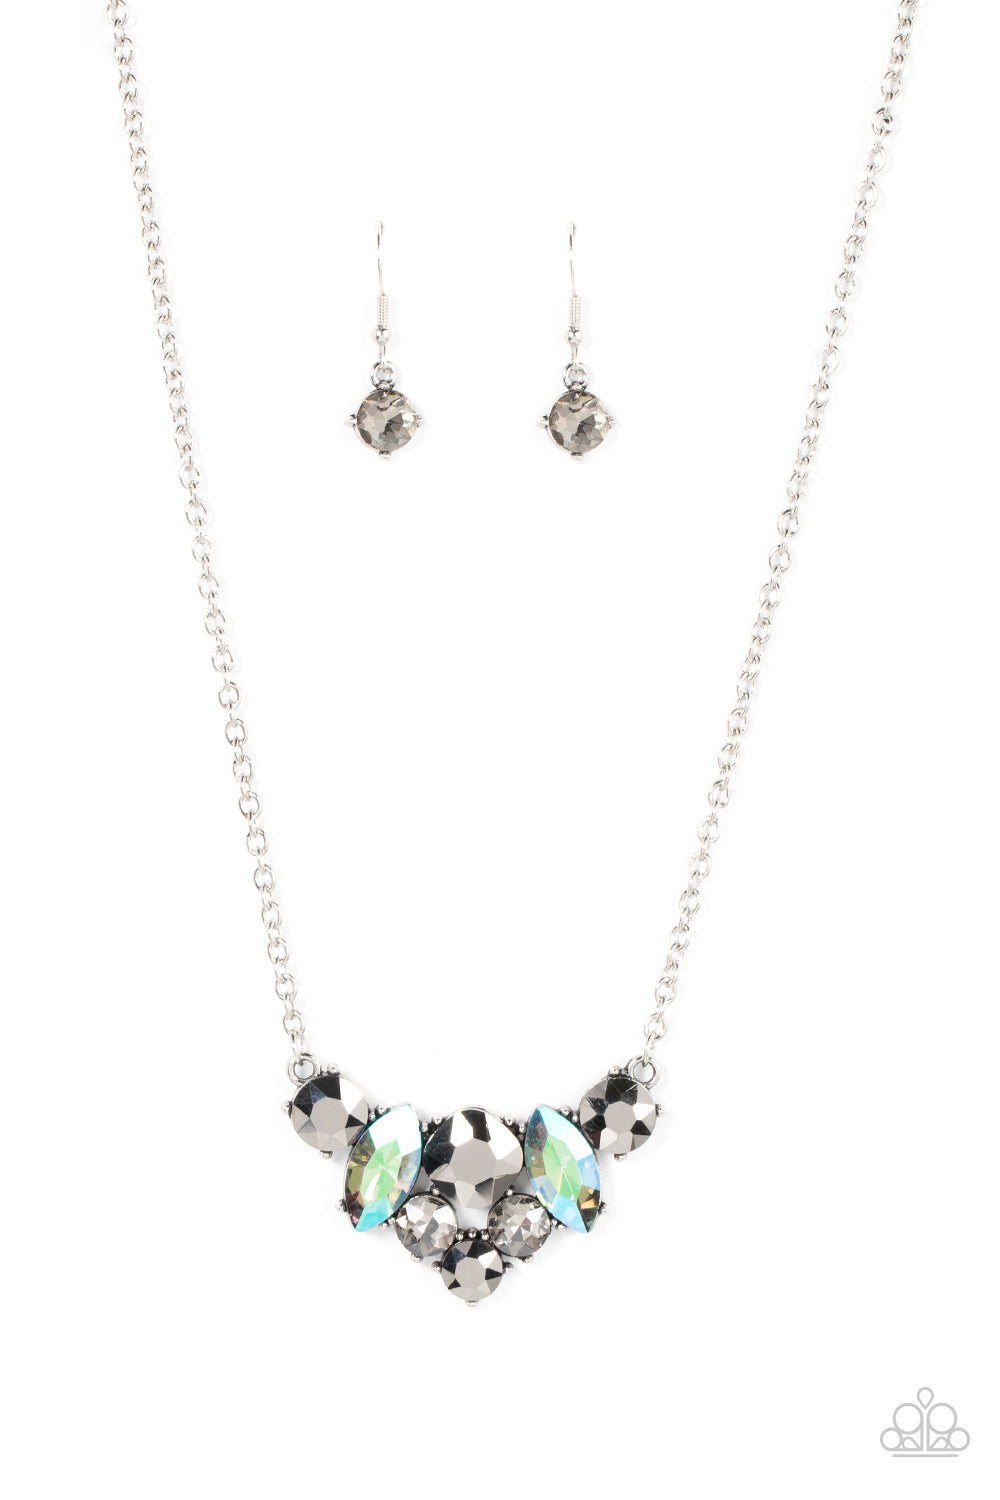 Lavishly Loaded Silver Iridescent Necklace Paparazzi Accessories Smoky Hematite. Subscribe & Save.